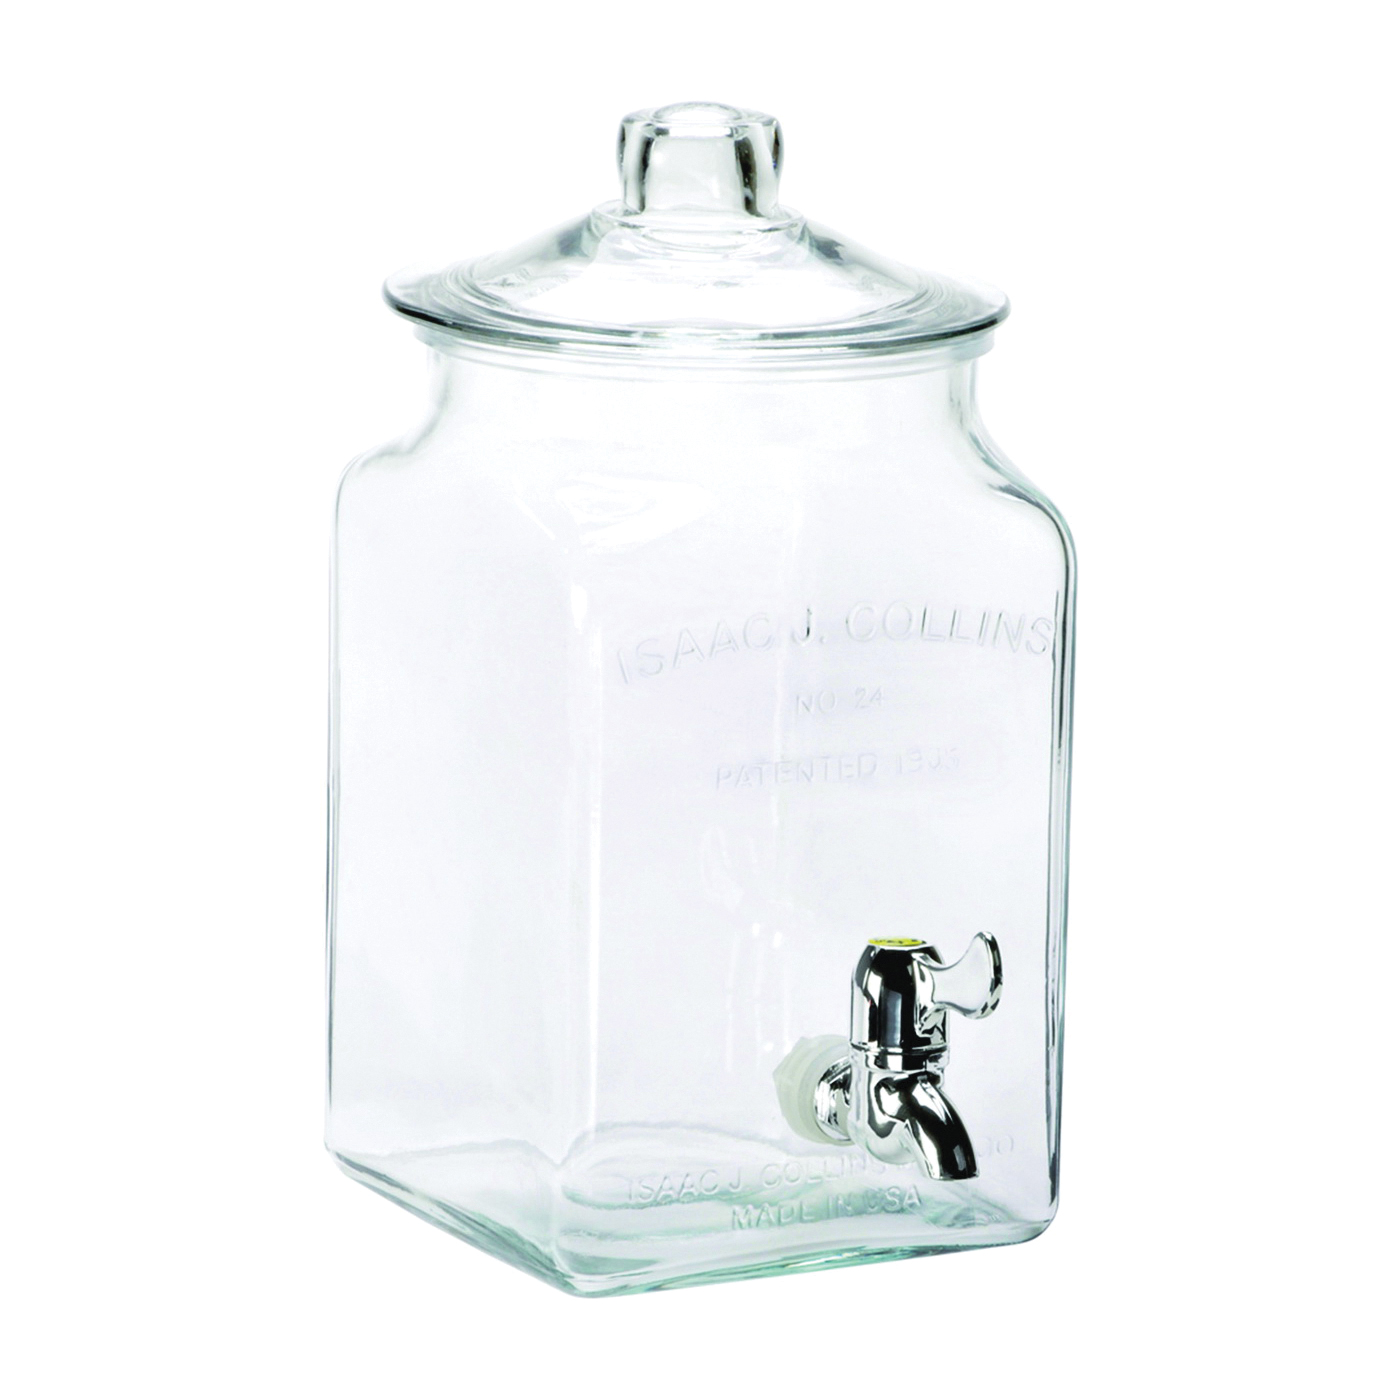 Arrow 1.5 Gal. Elite Beverage Container with Spout - Power